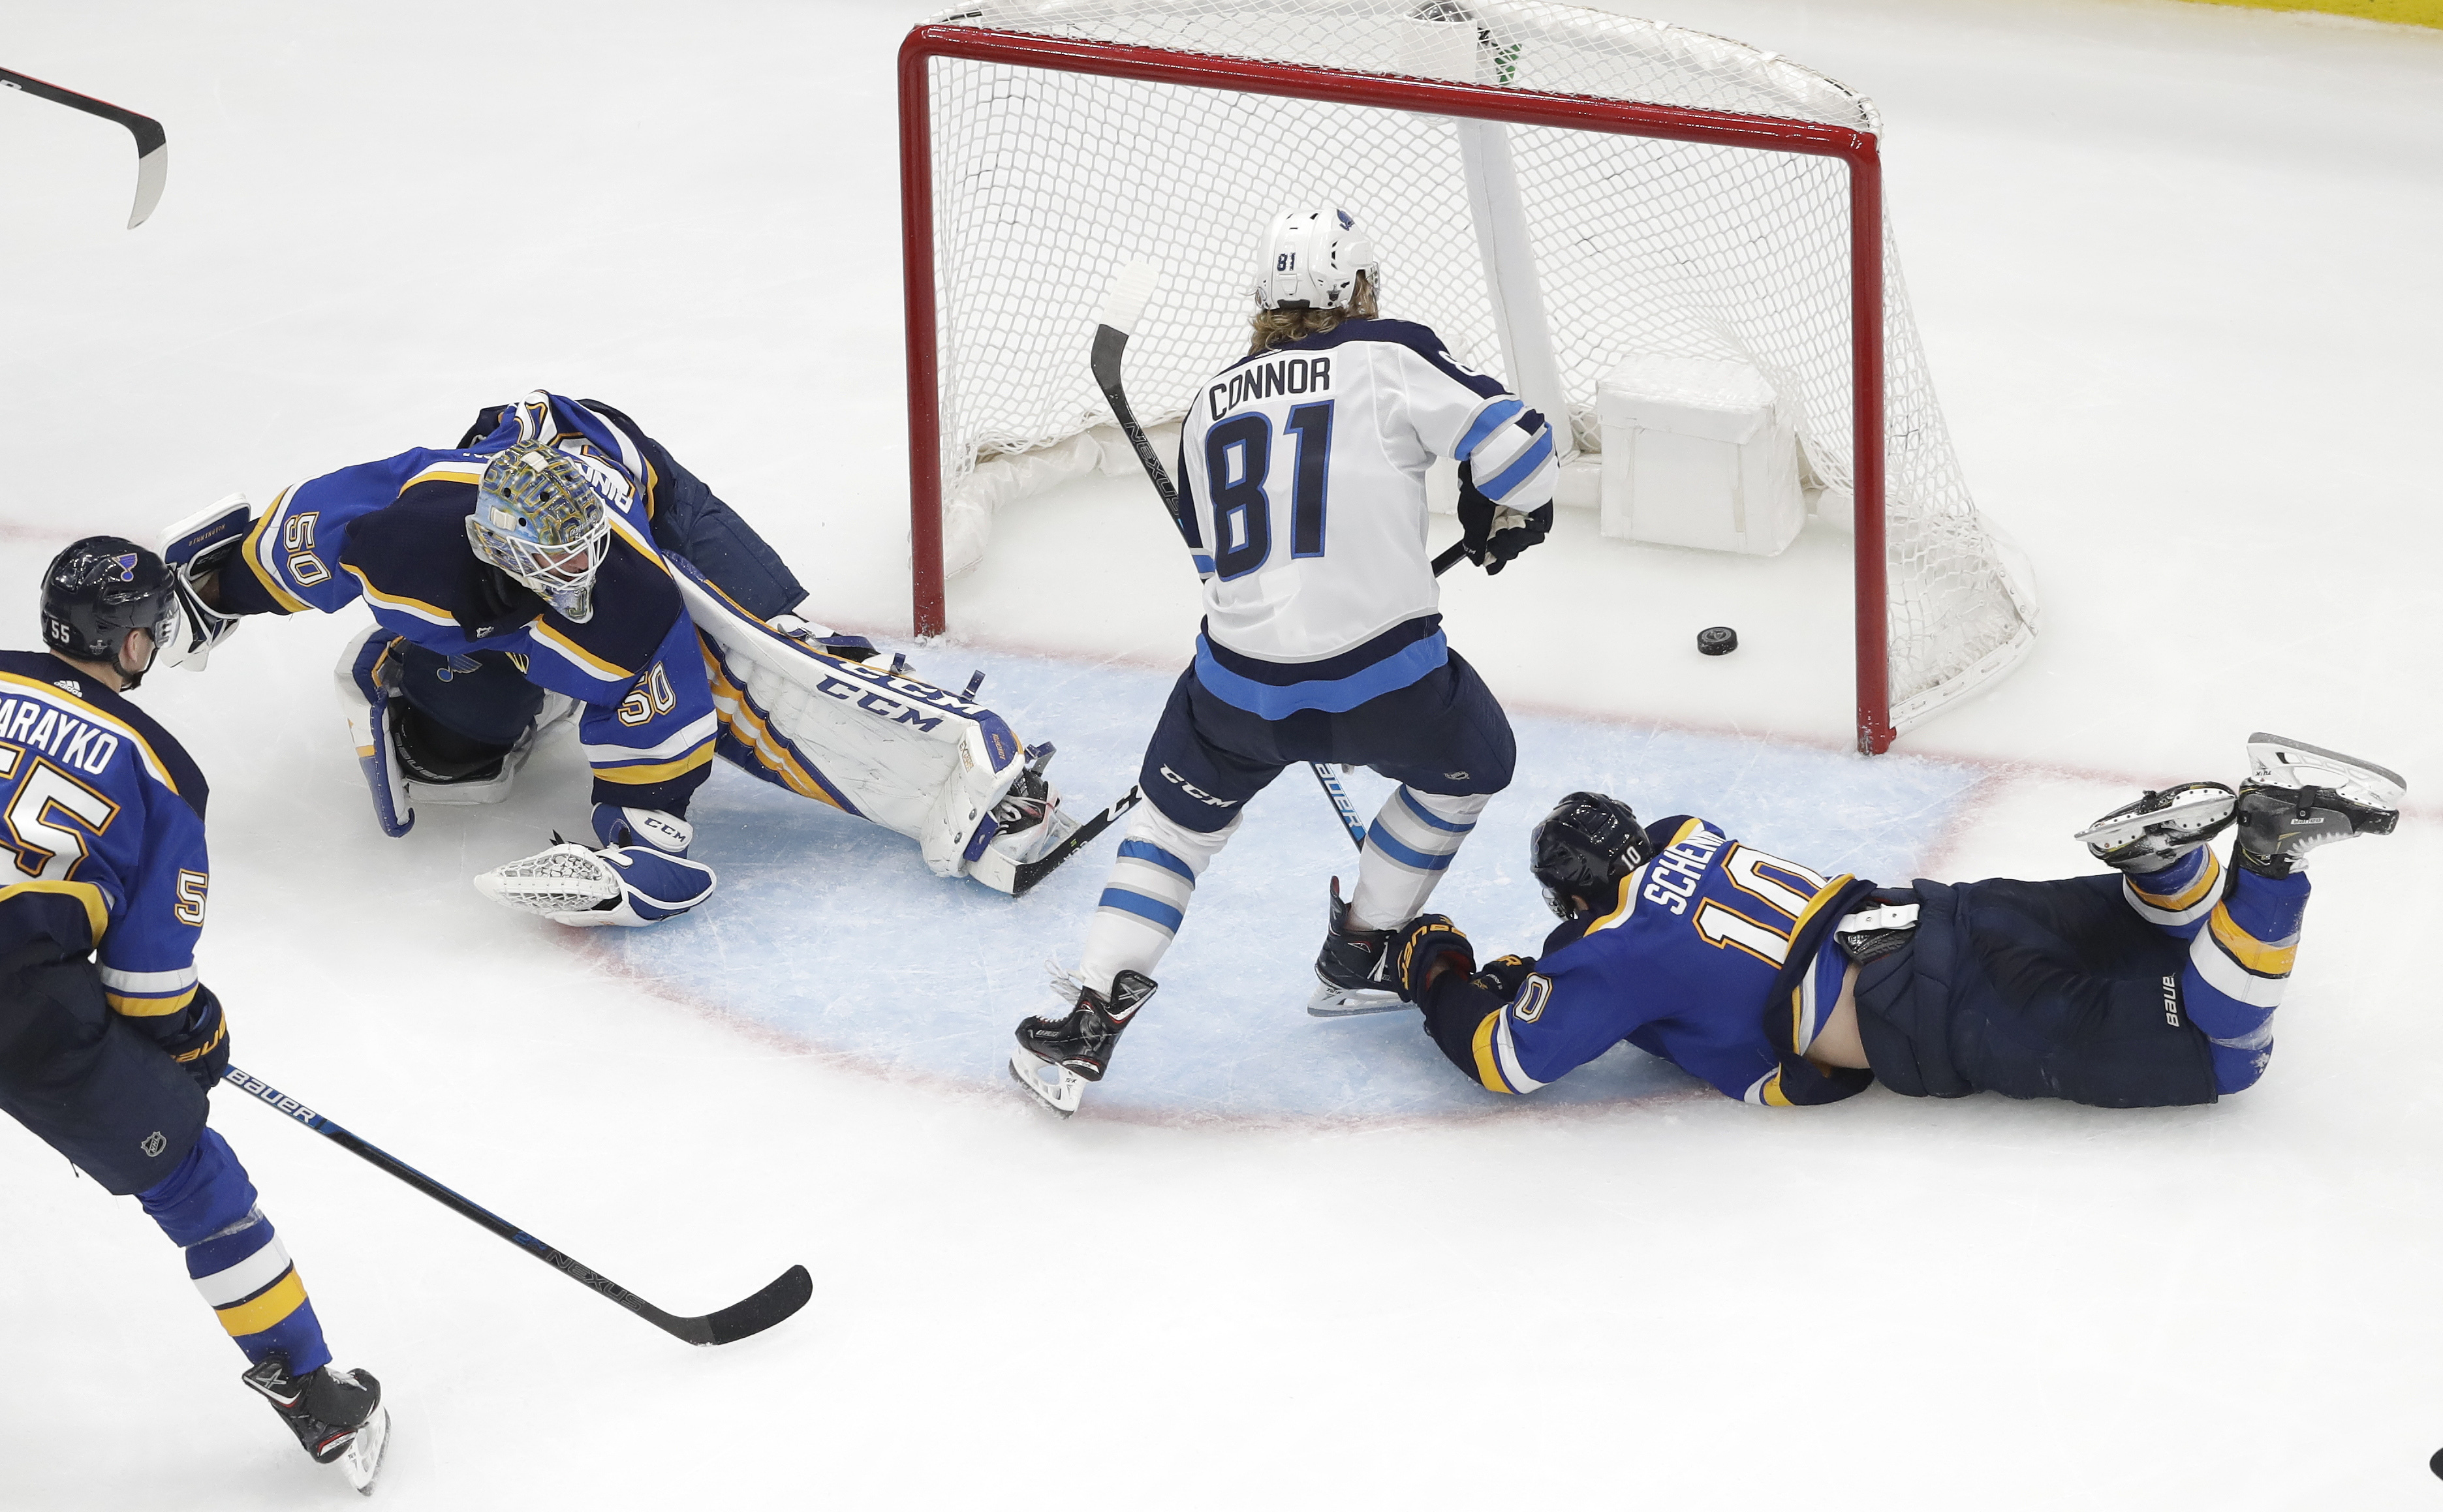 Connor scores in OT as Jets beat Blues 2-1 to even series